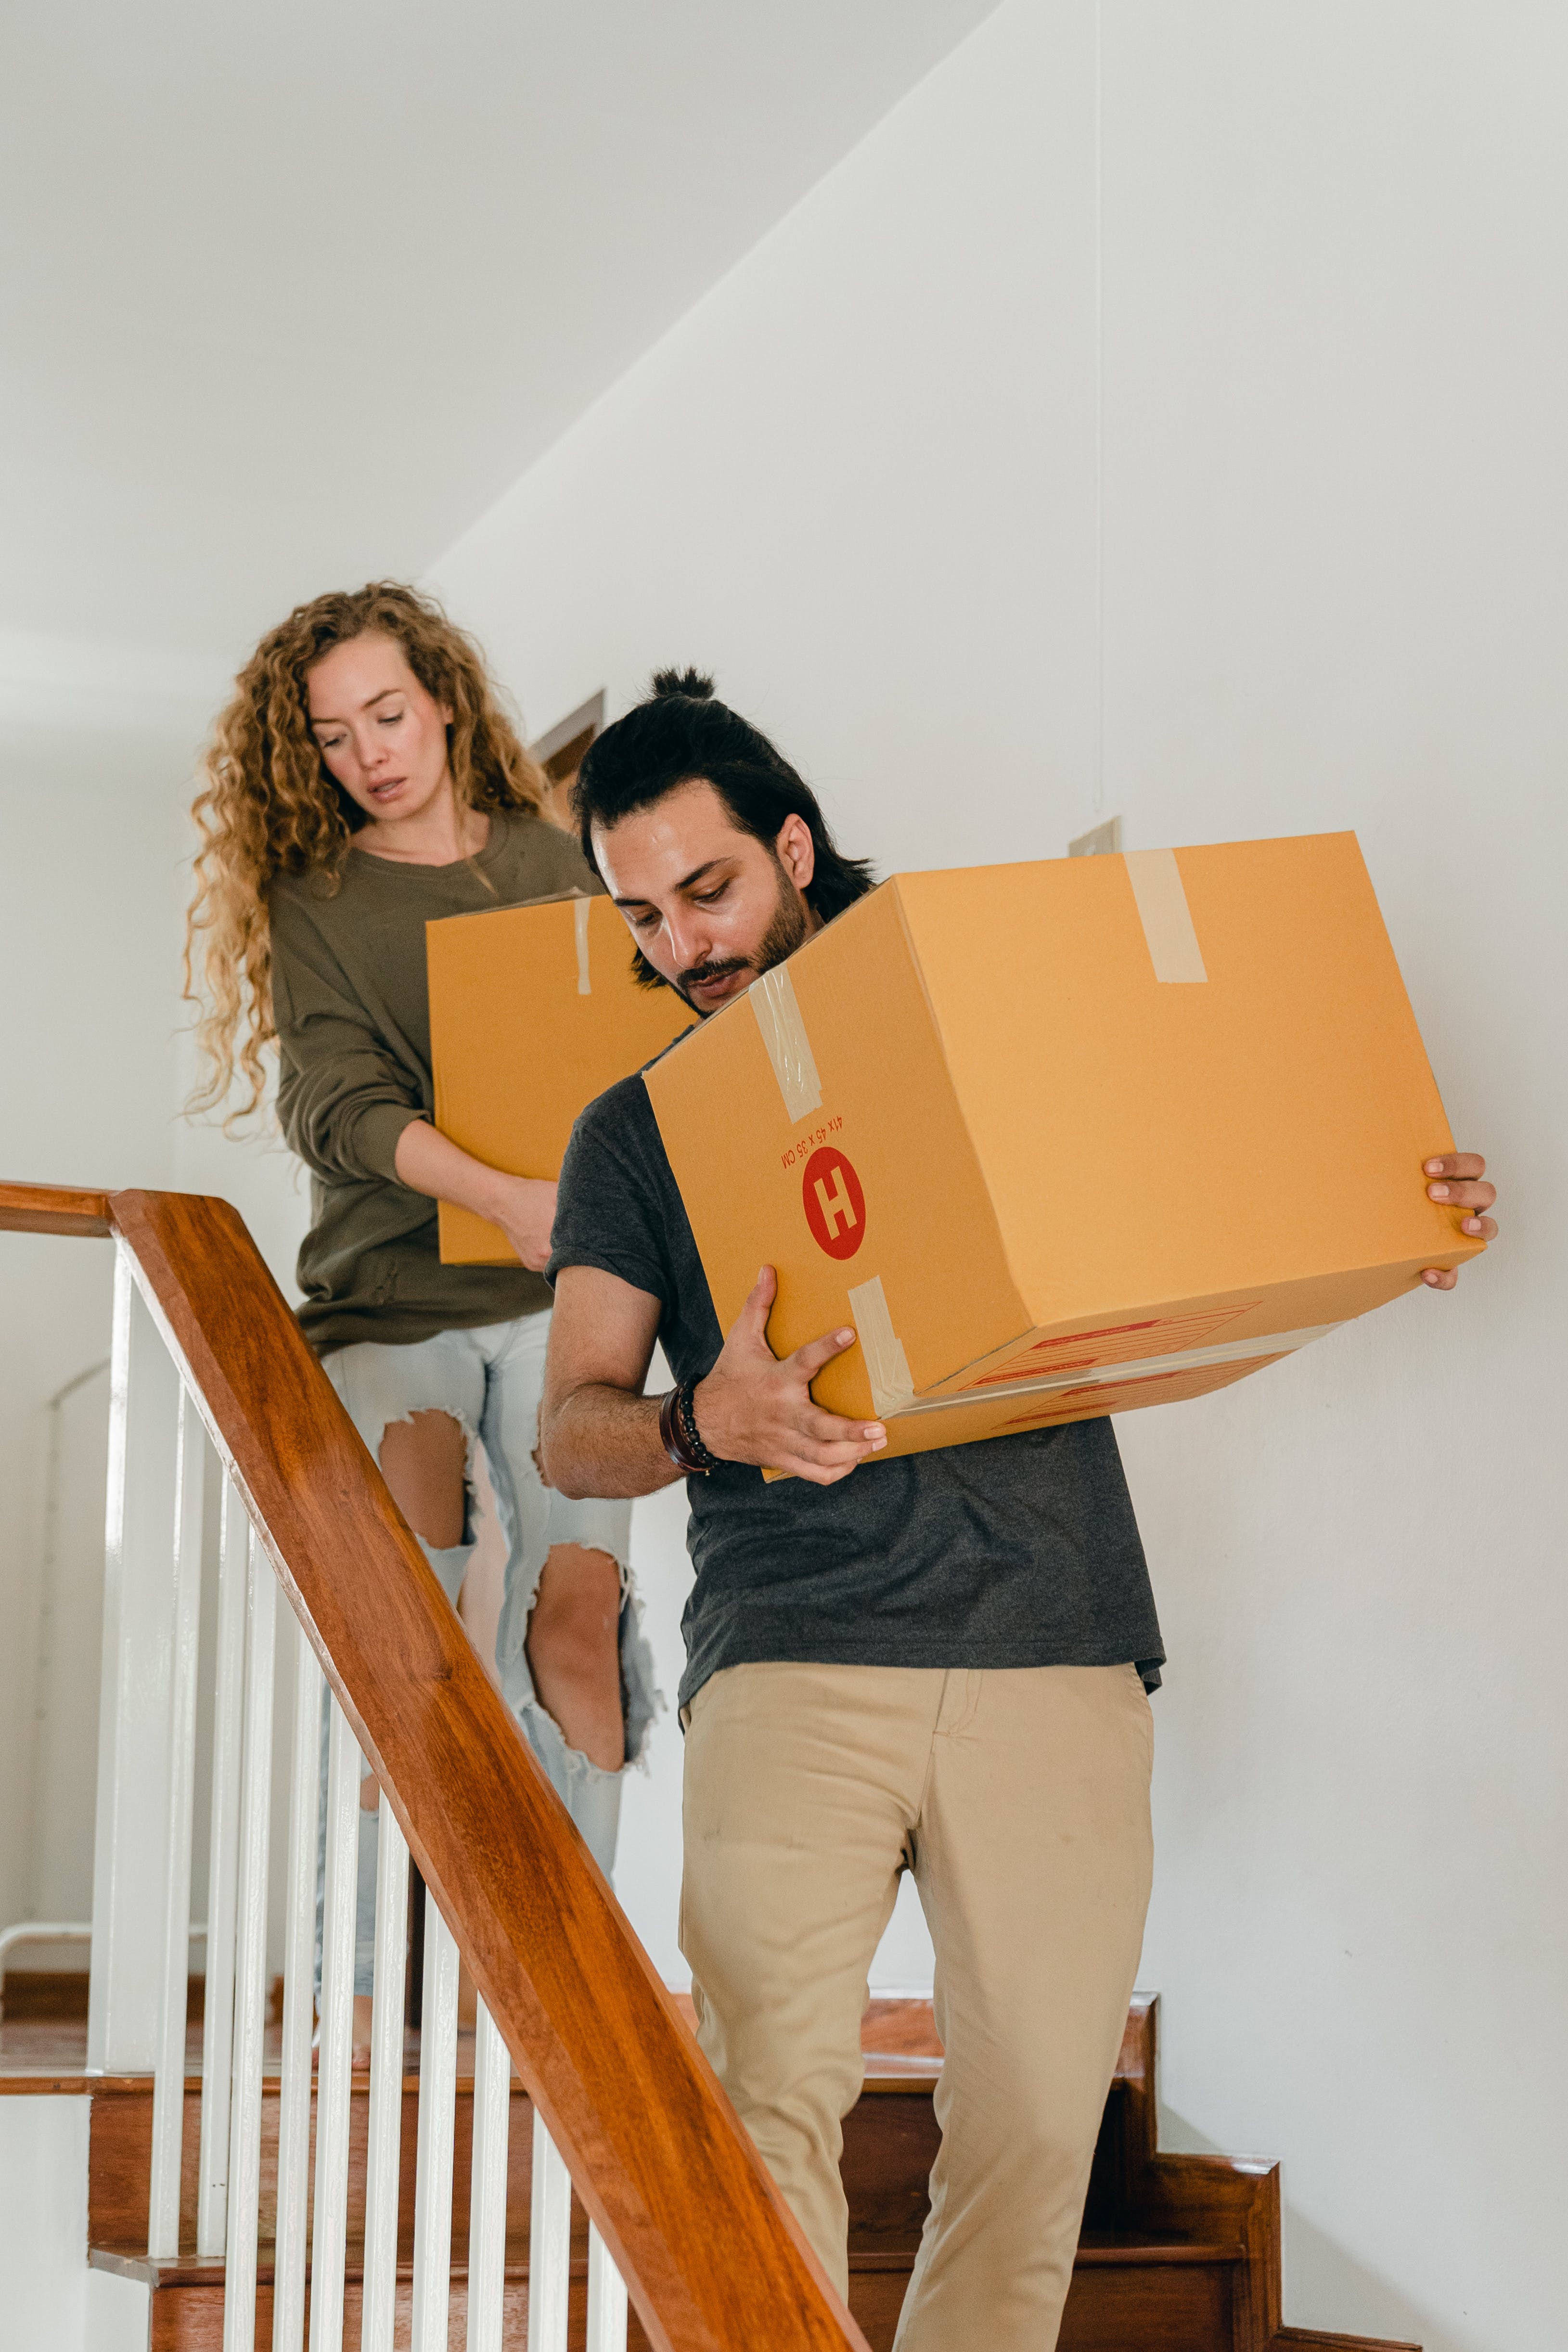 A young couple carrying boxes while walking down the stairs | Source: Pexels